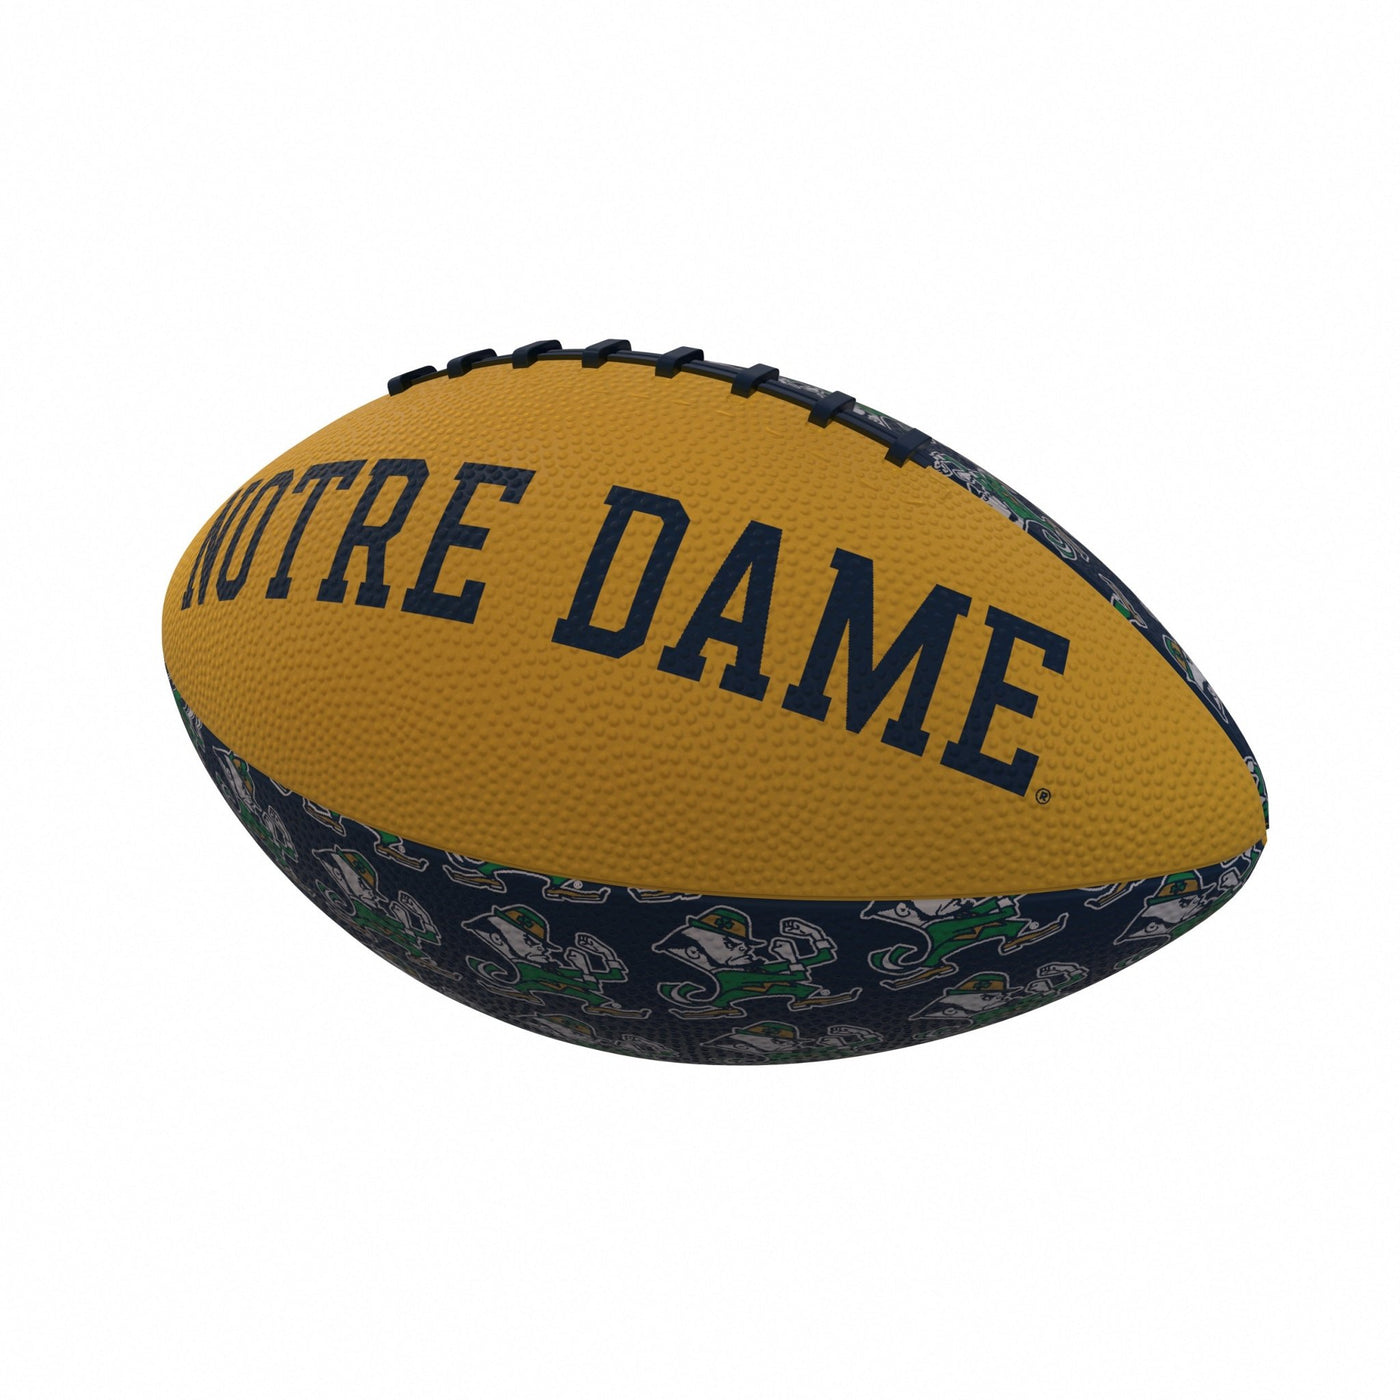 Notre Dame Repeating Mini-Size Rubber Football - Logo Brands